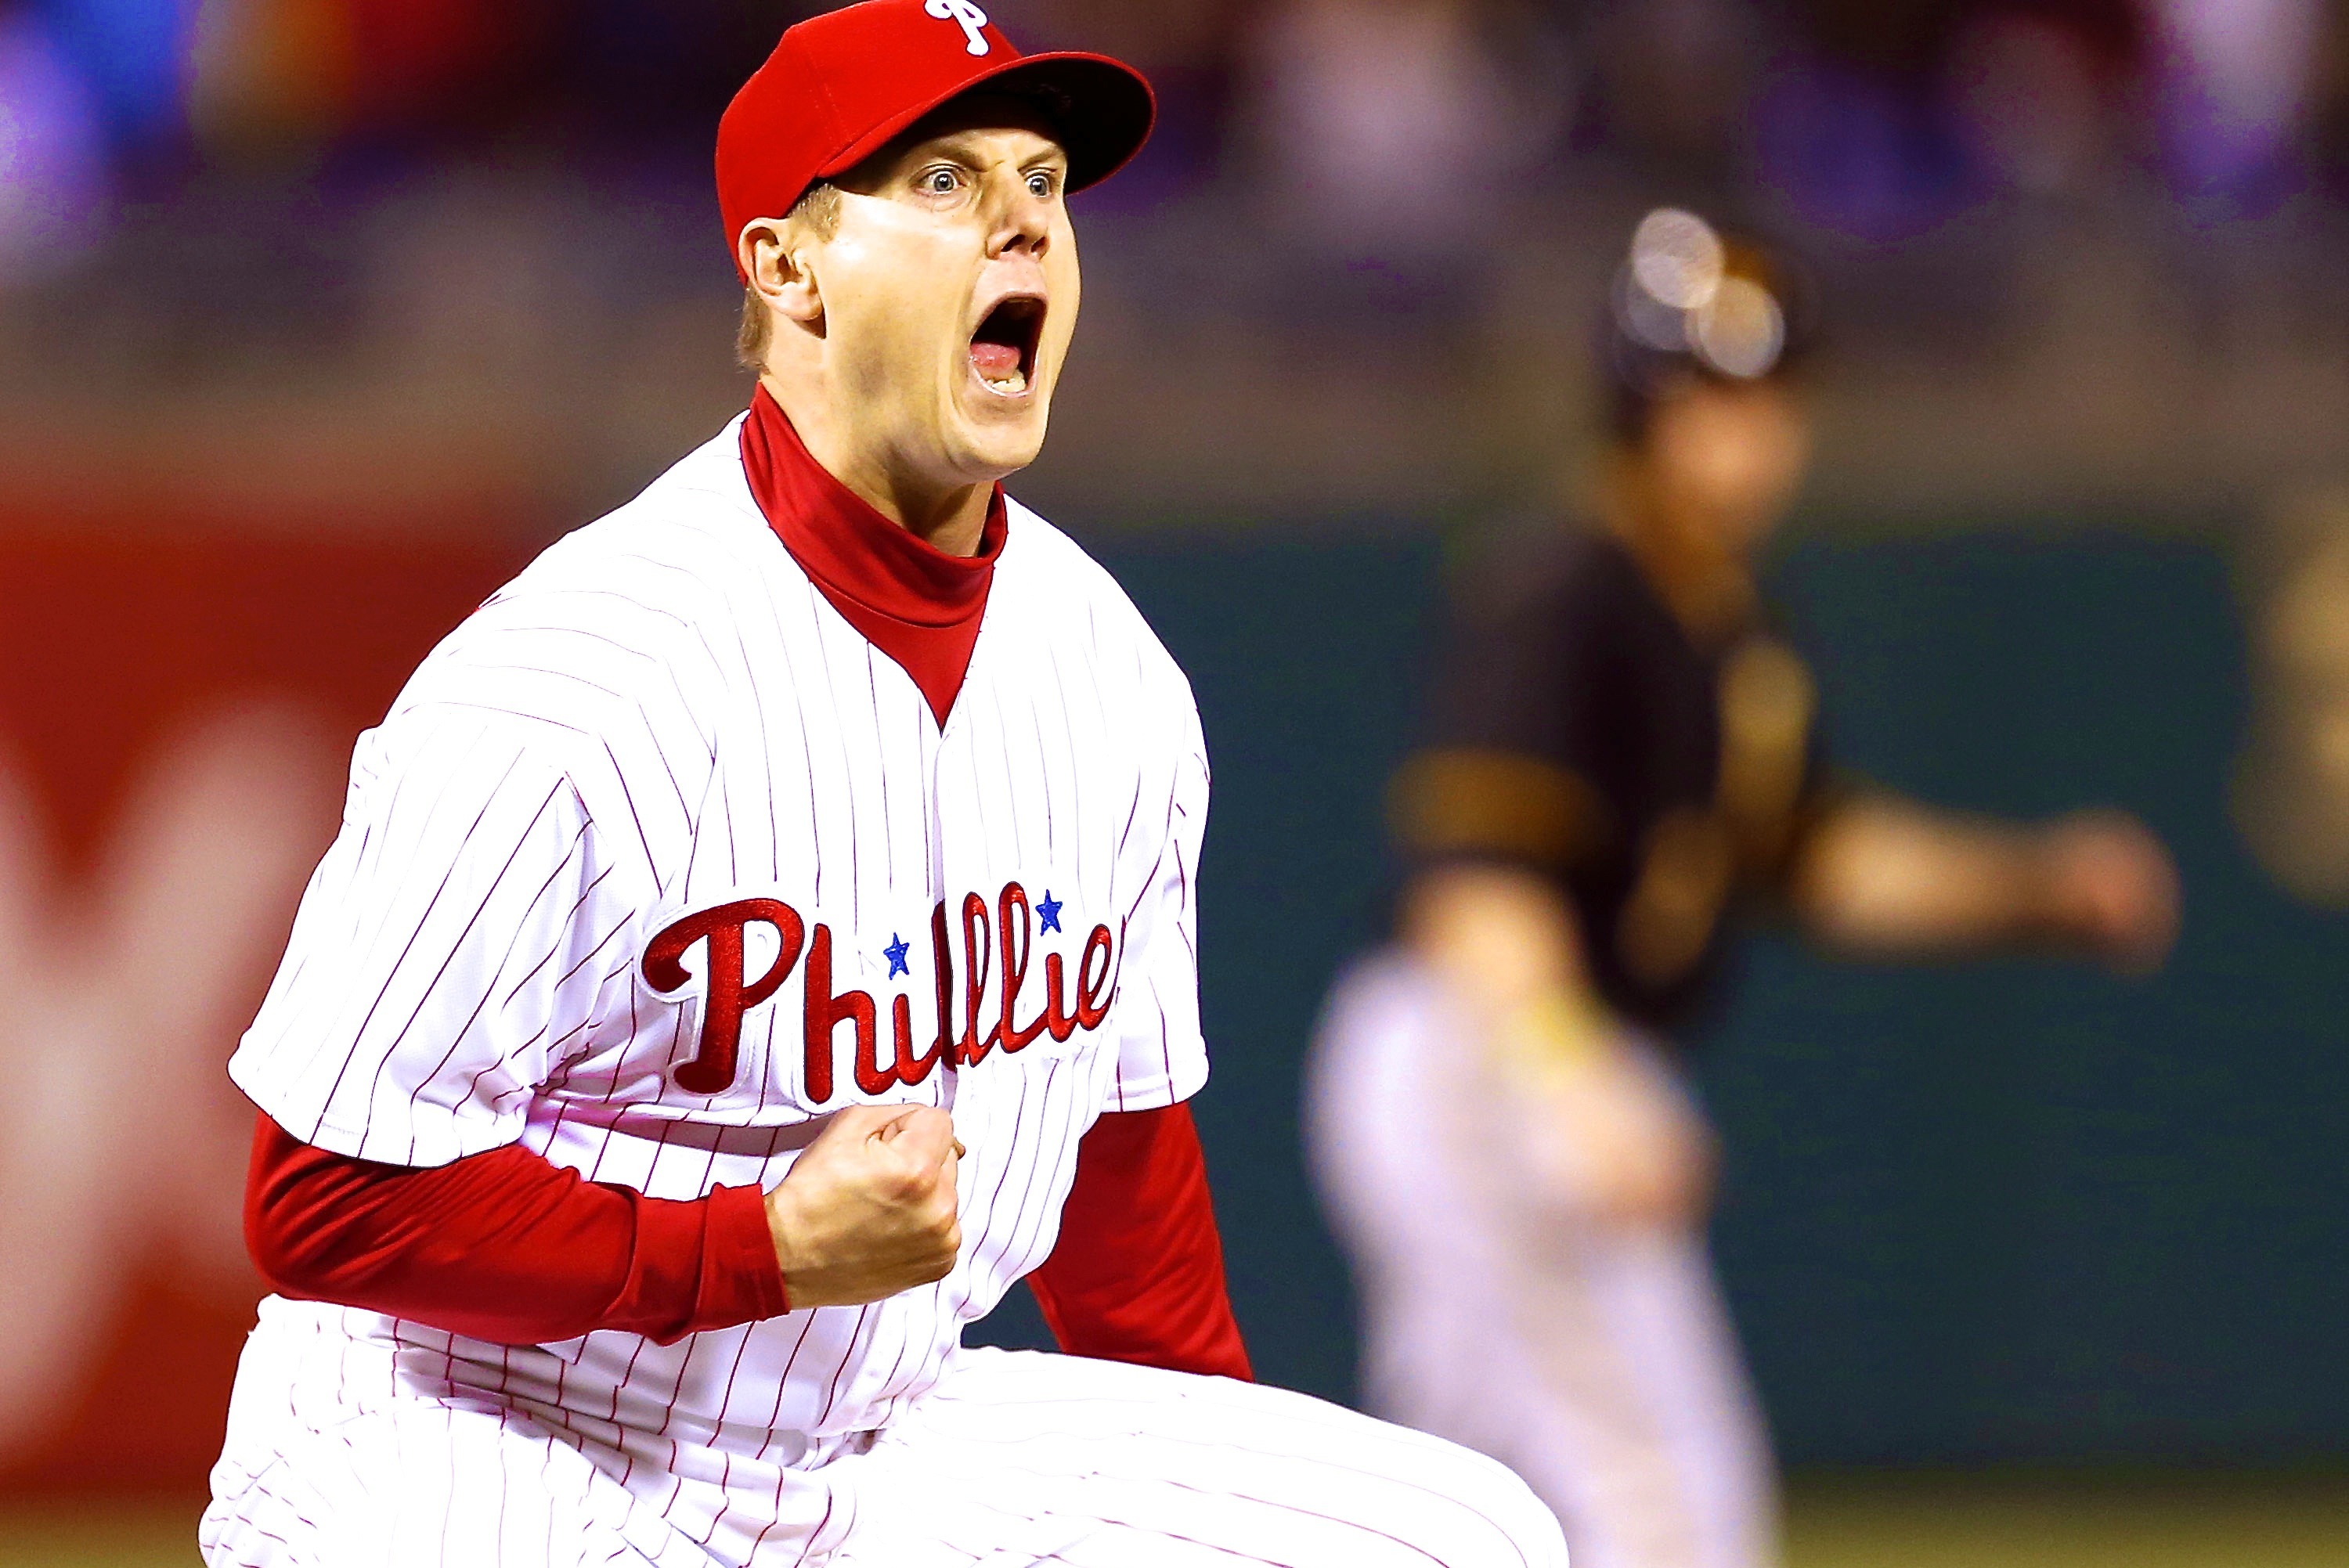 Jonathan Papelbon on X: After some detective work I have found